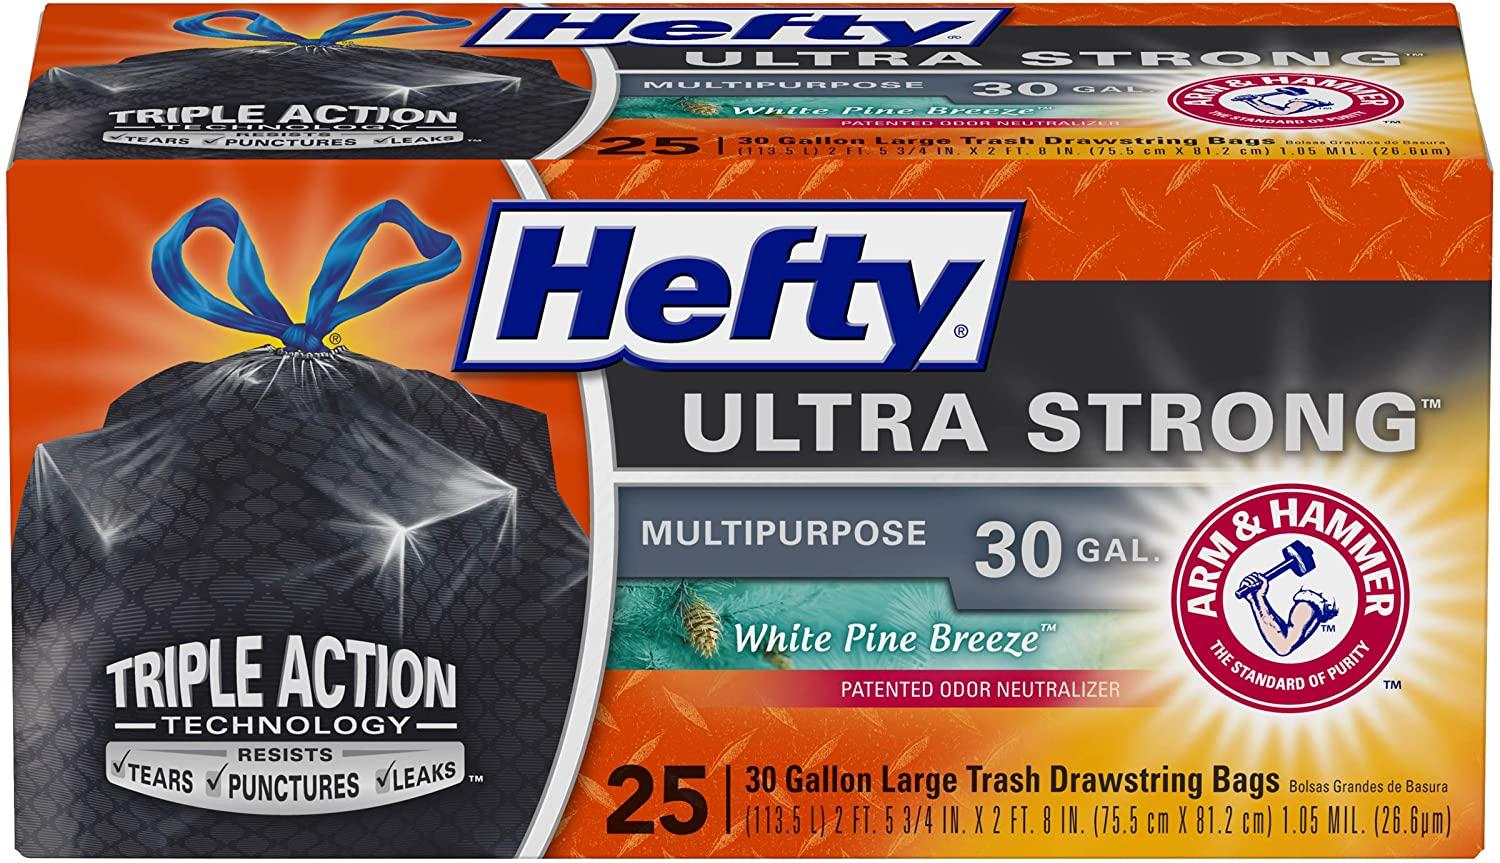 50 Hefty Ultra Strong Large Trash Bags for $8.96 Shipped